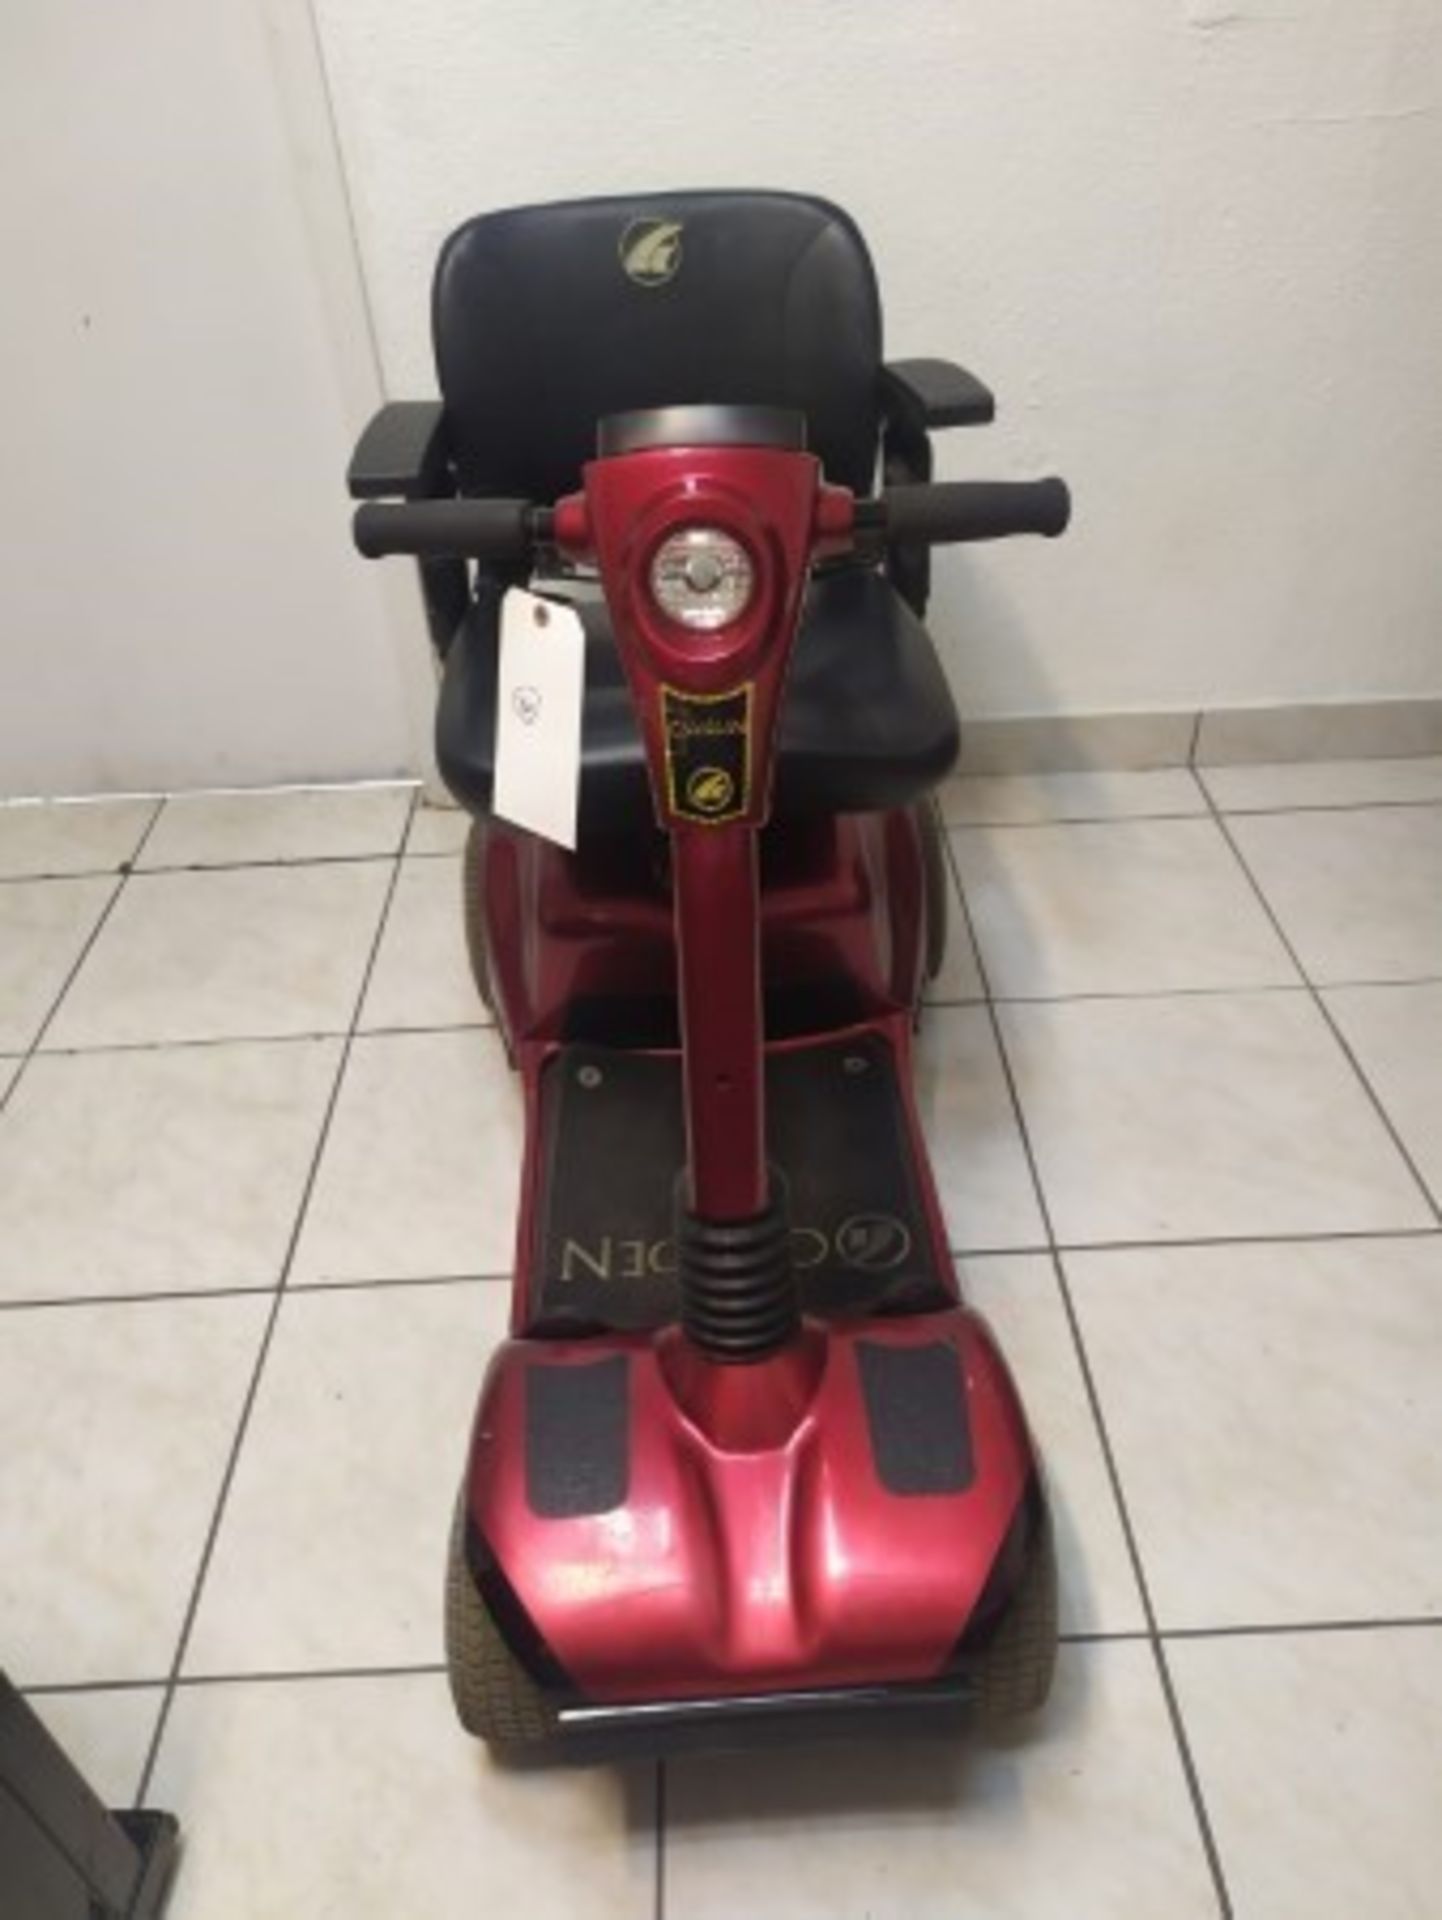 2005 GOLDEN COMPANION GC421 4-WHEEL SCOOTER WITH BUILT-IN CHARGER & BATTERY - RED - 400LB CAPACITY - - Image 3 of 5